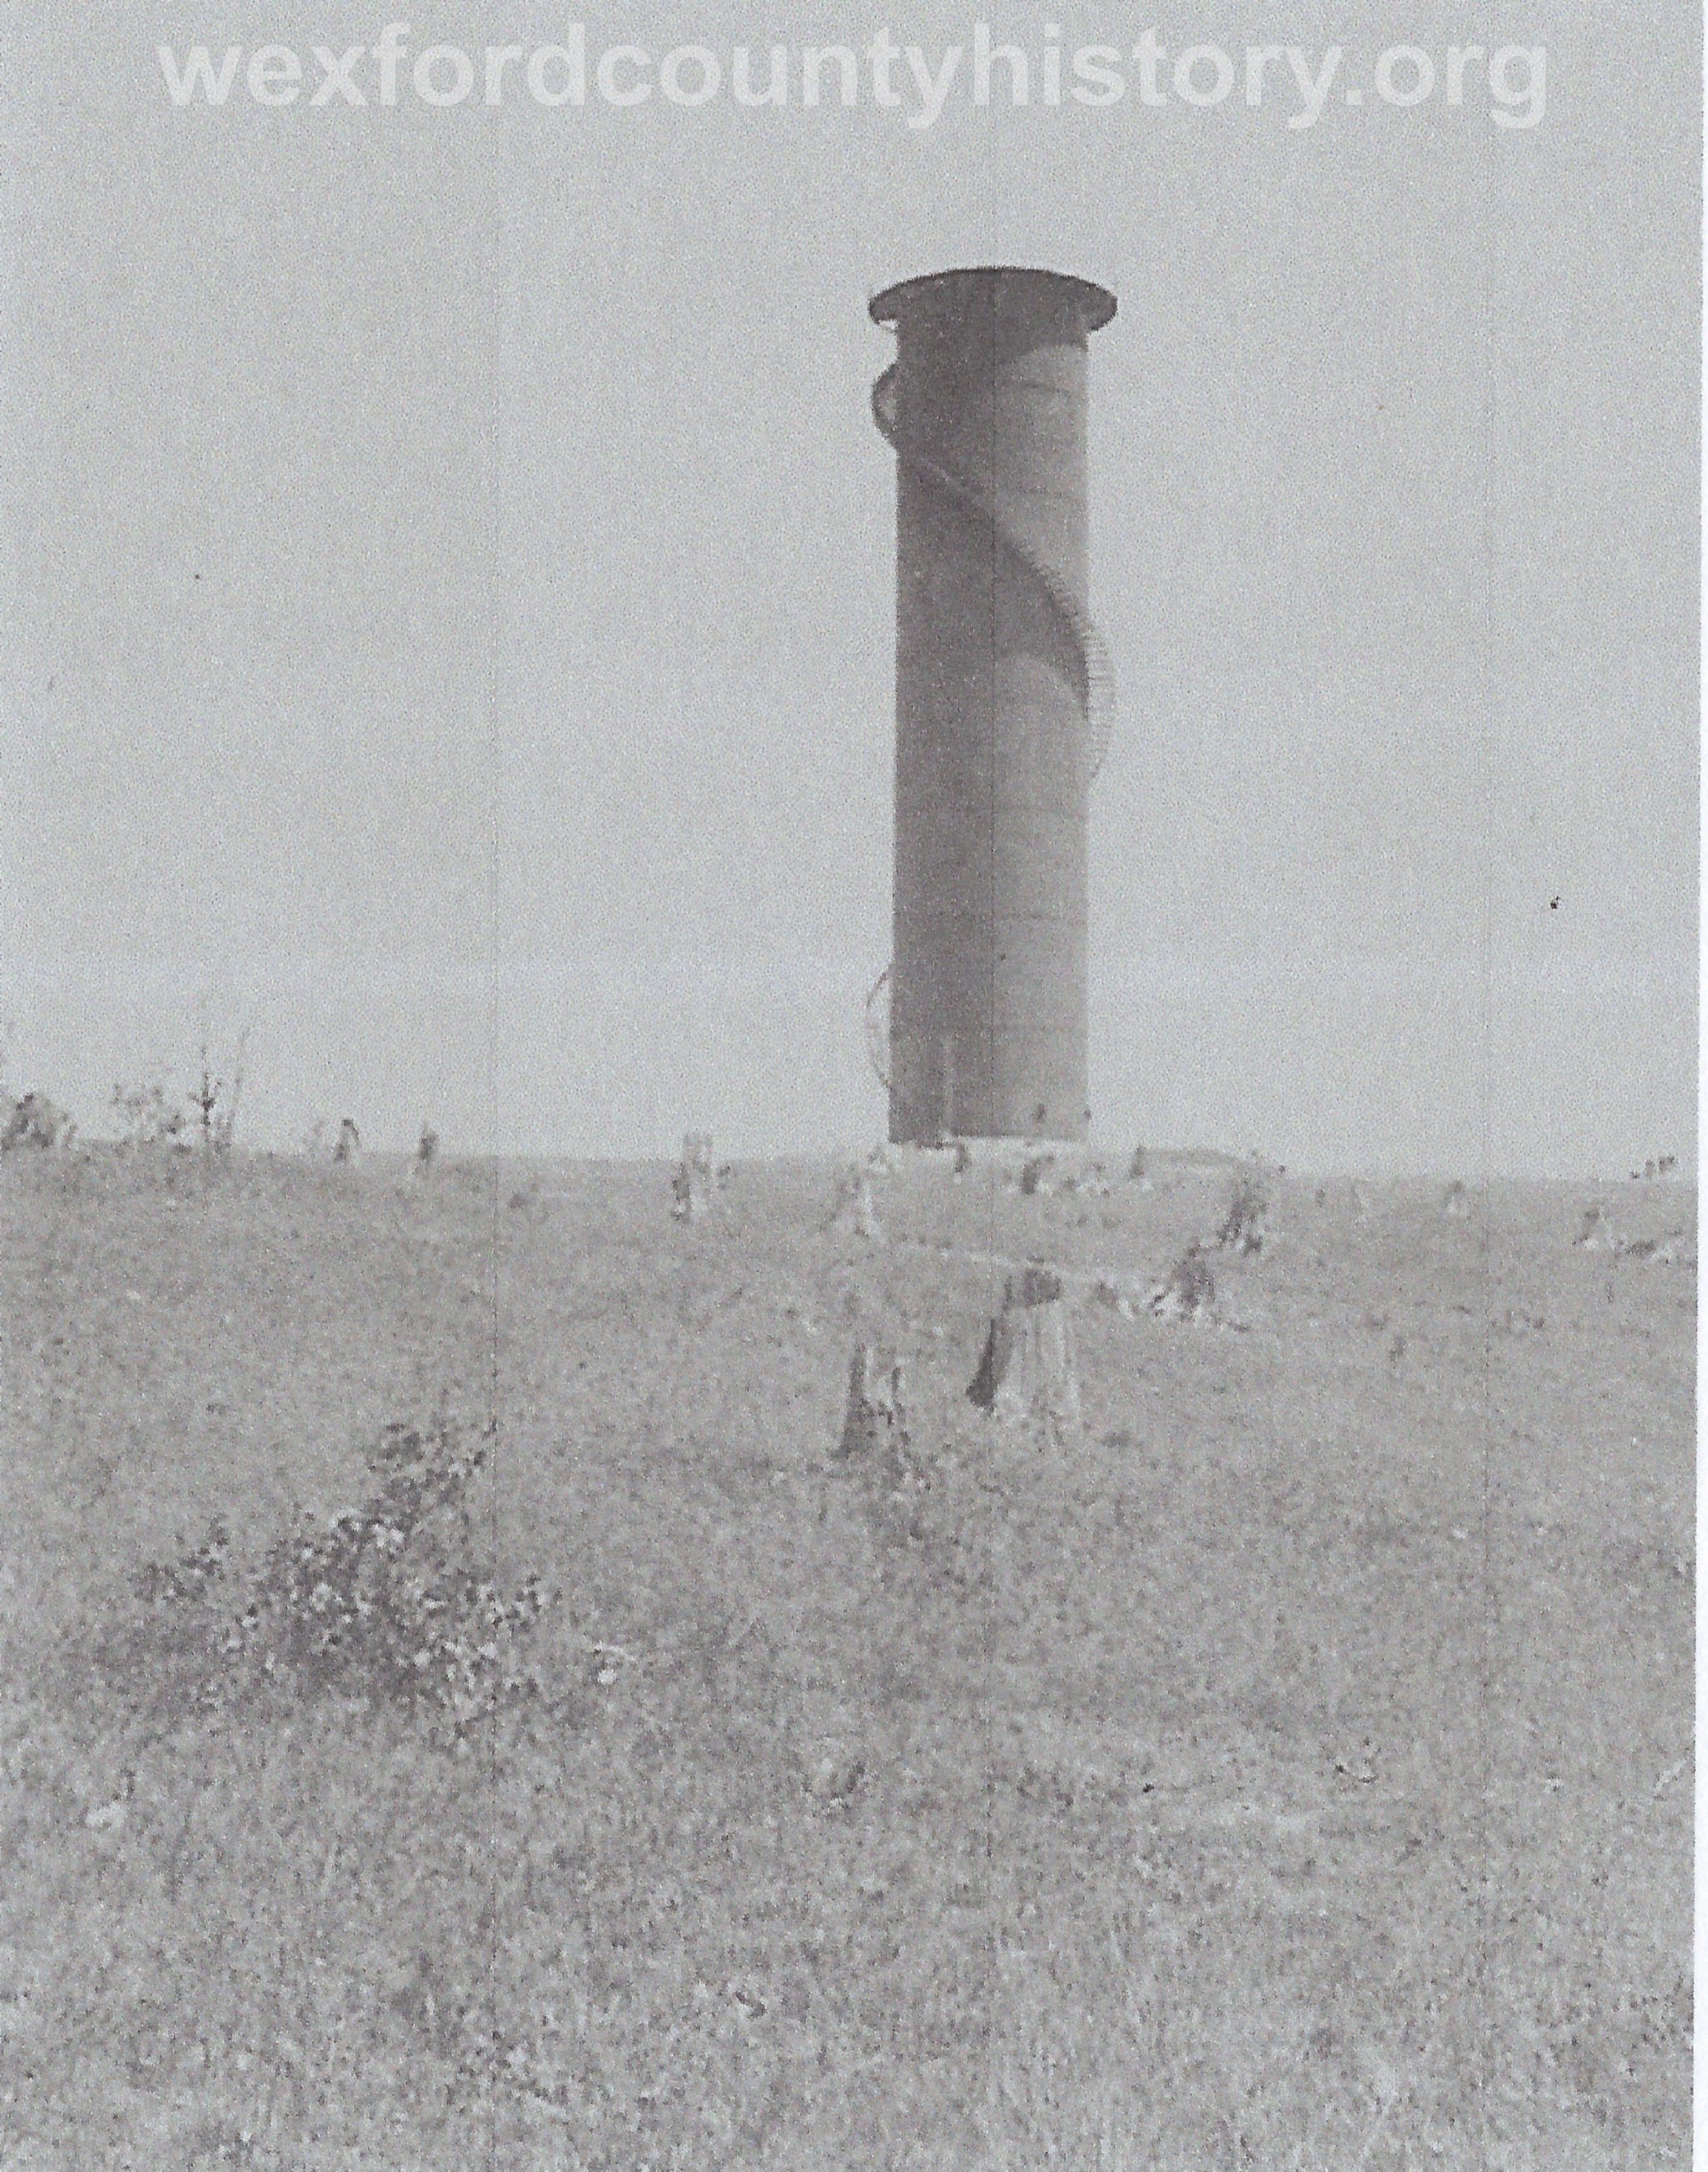 Diggins Hill Water Tower